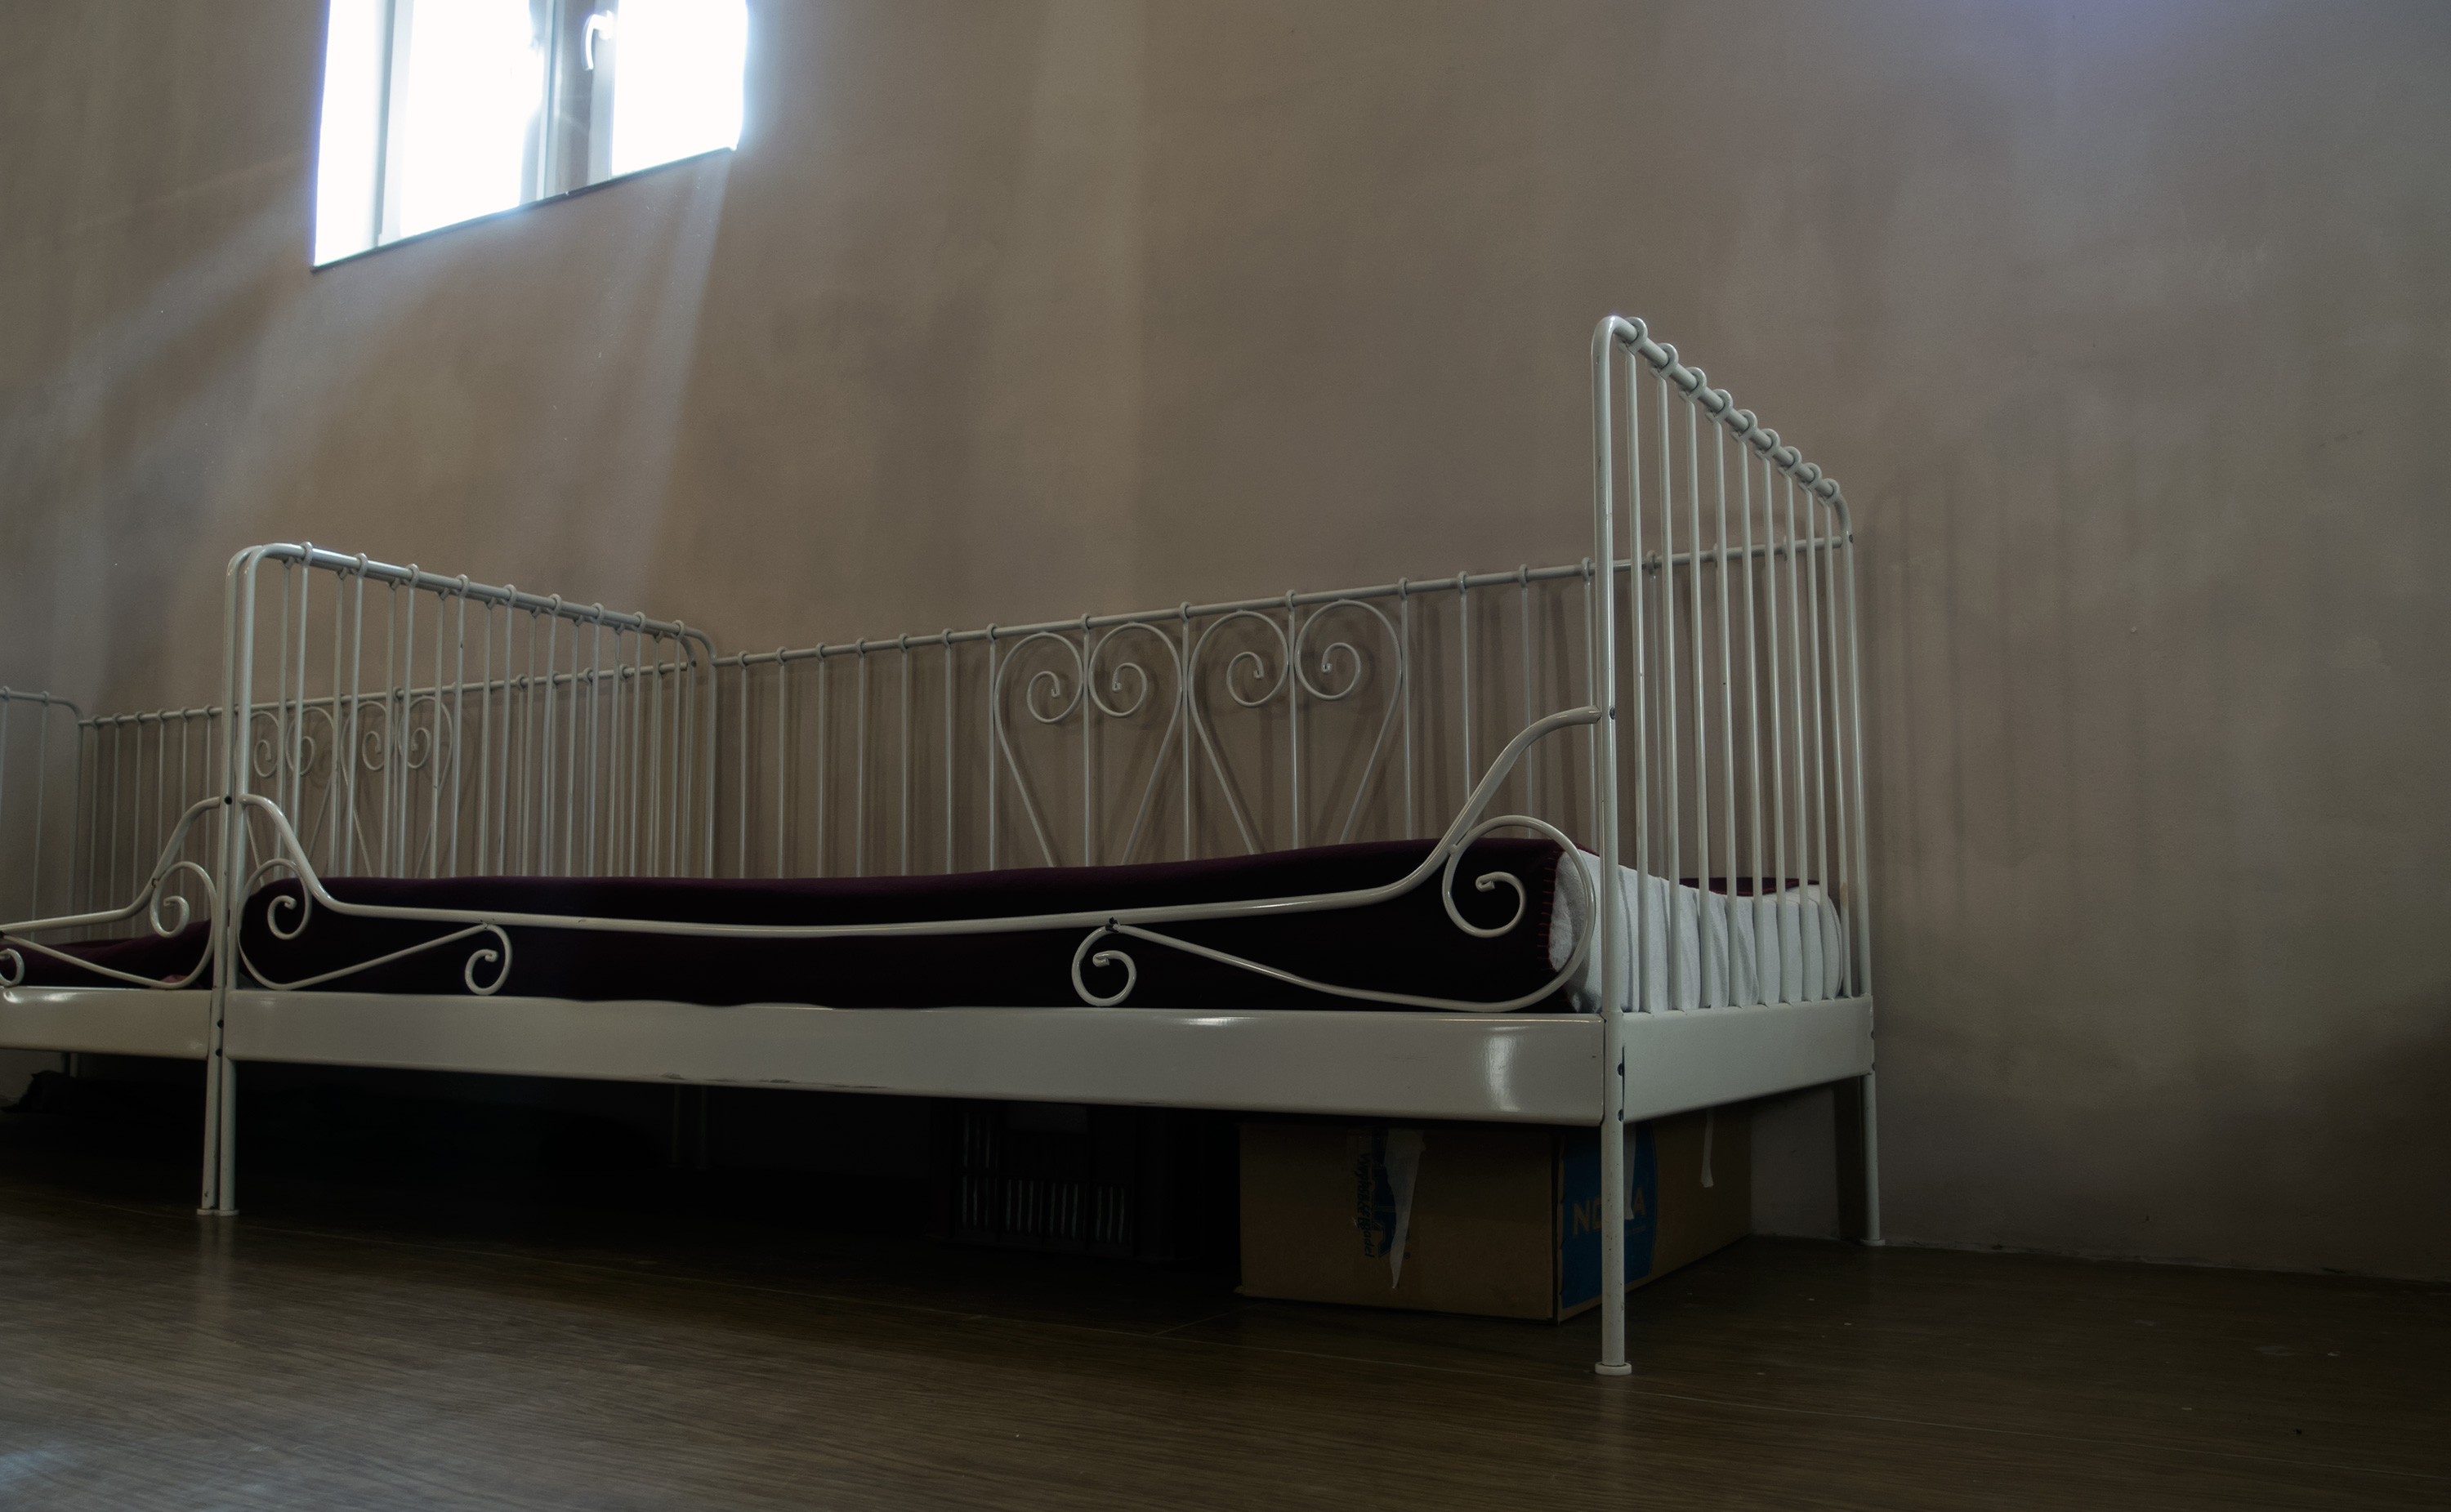 Simple empty bed with white metal railing on three sides